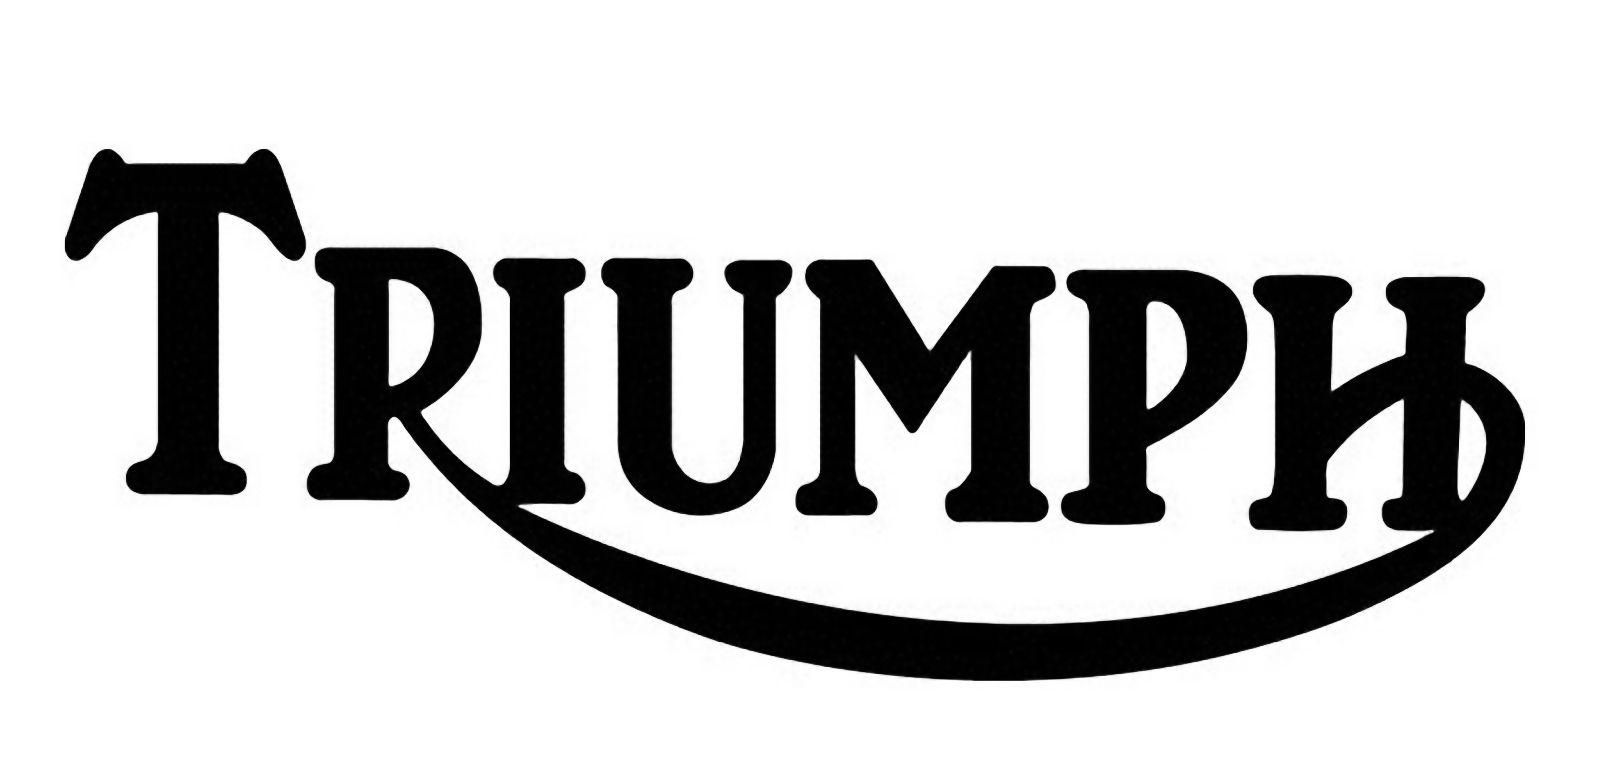 Old Triumph Logo - Triumph logo: history, evolution, meaning | Motorcycle Brands